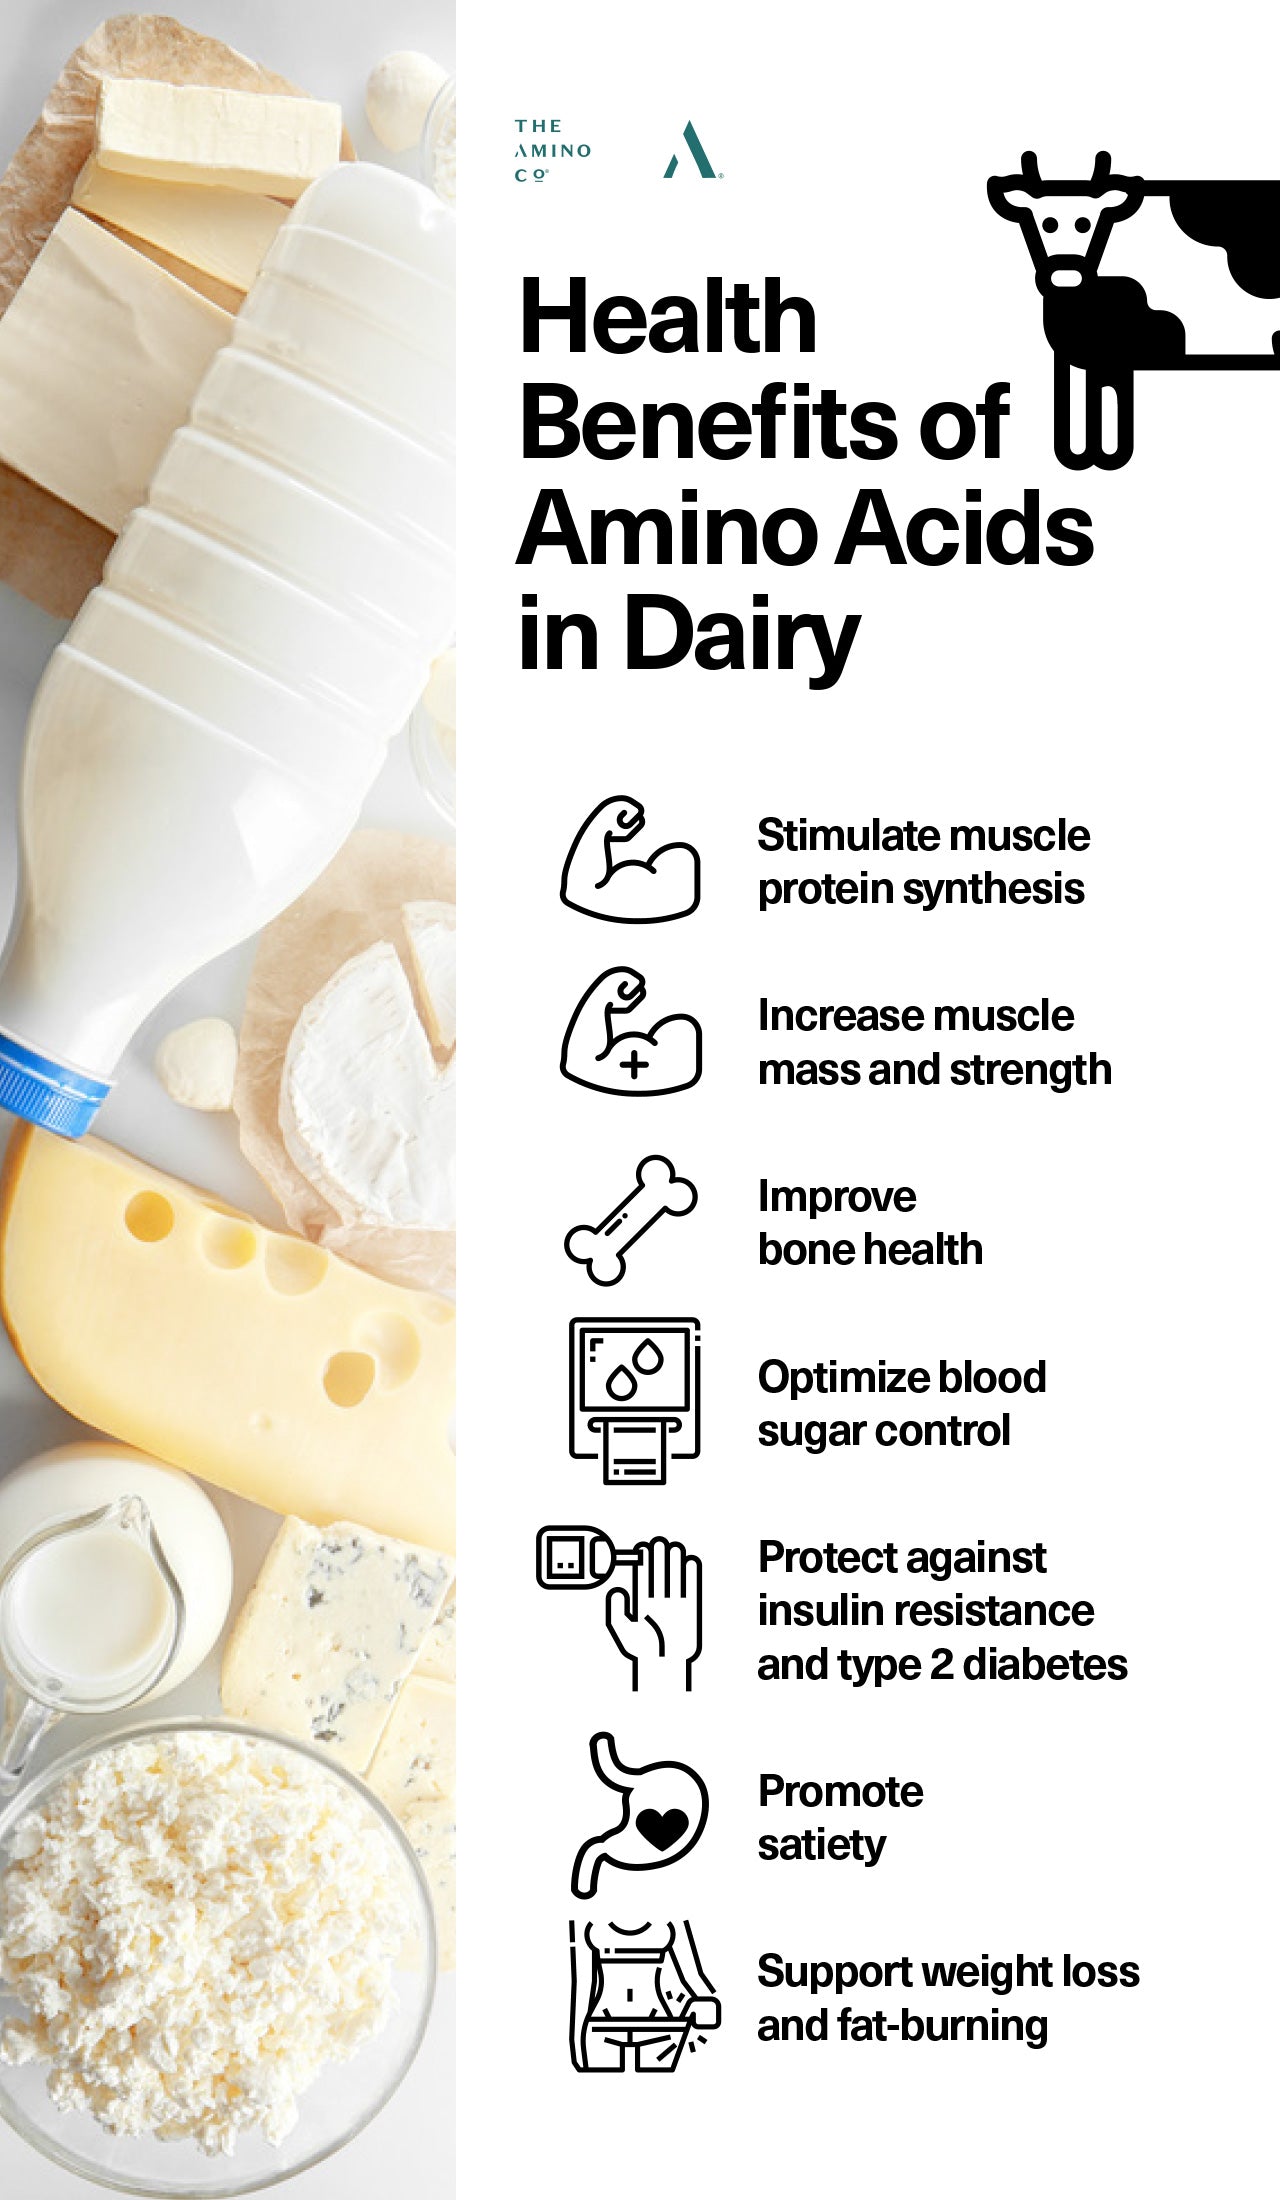 Health Benefits of Amino Acids in Dairy